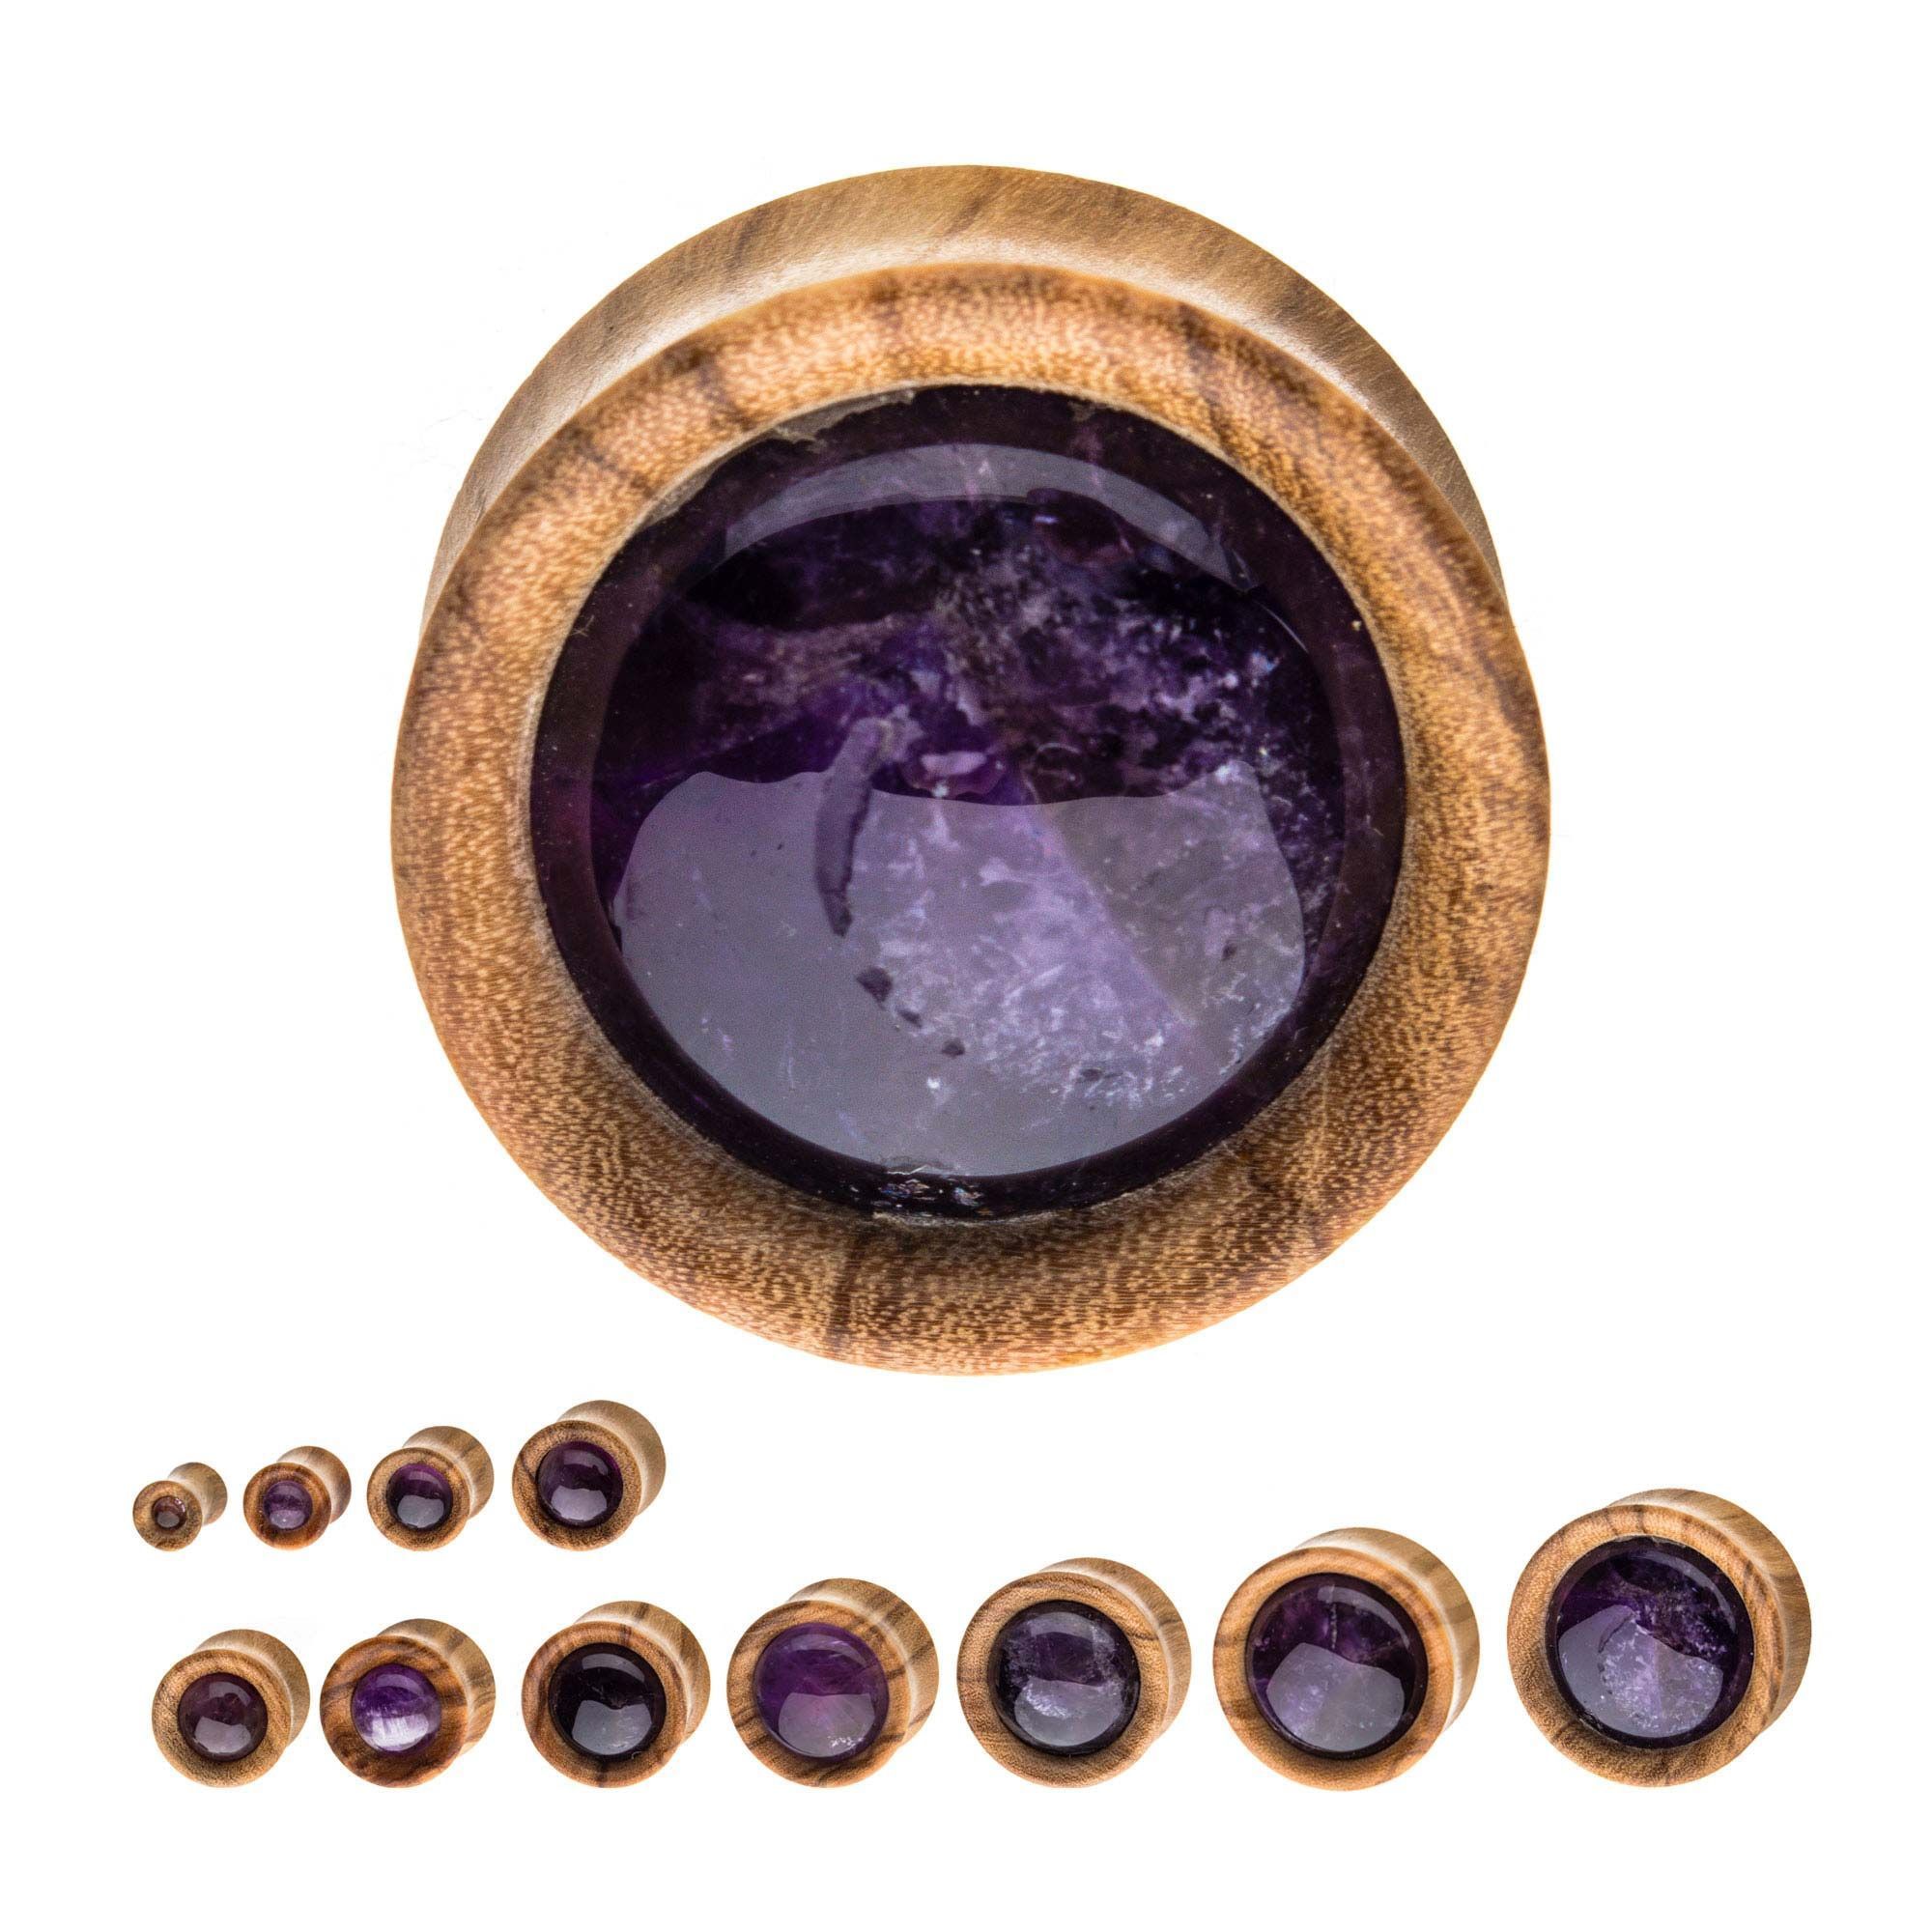 Plugs Earrings - Double Flare Double Flare Olive Wood with Amethyst CZ Gem Plugs - 1 Pair sbvwpl500am -Rebel Bod-RebelBod